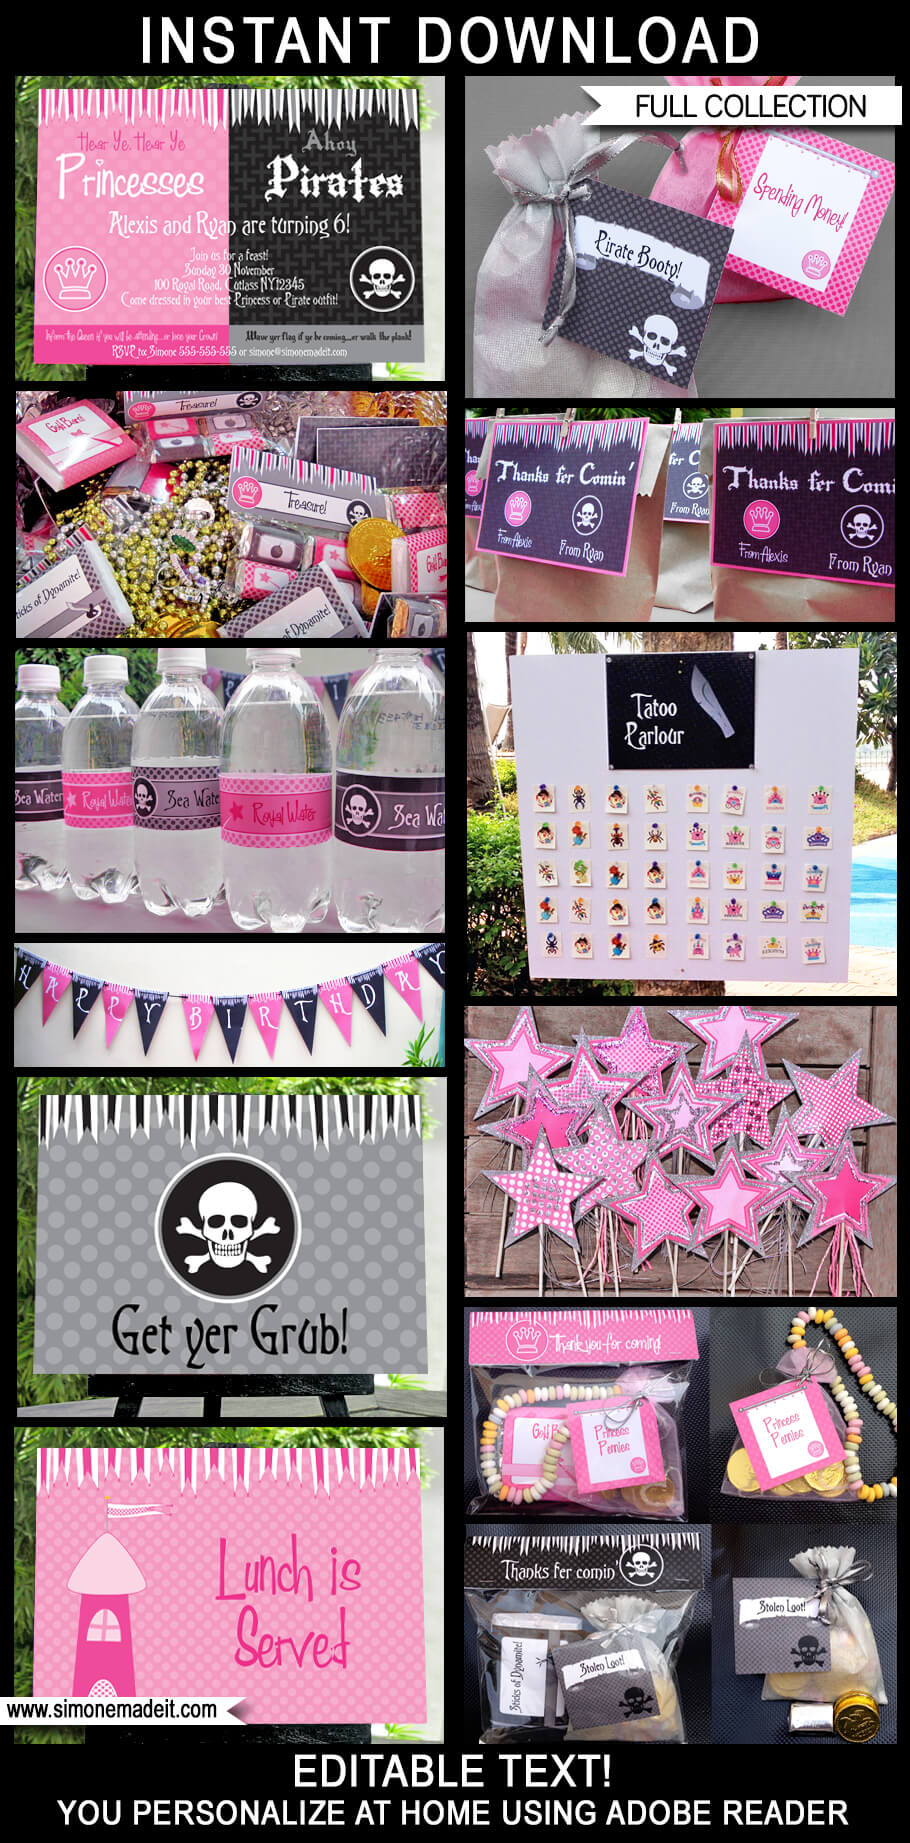 Pirate and Princess Party Printables, Invitations & Decorations | Editable Birthday Party Theme Templates | INSTANT DOWNLOAD $12.50 via SIMONEmadeit.com